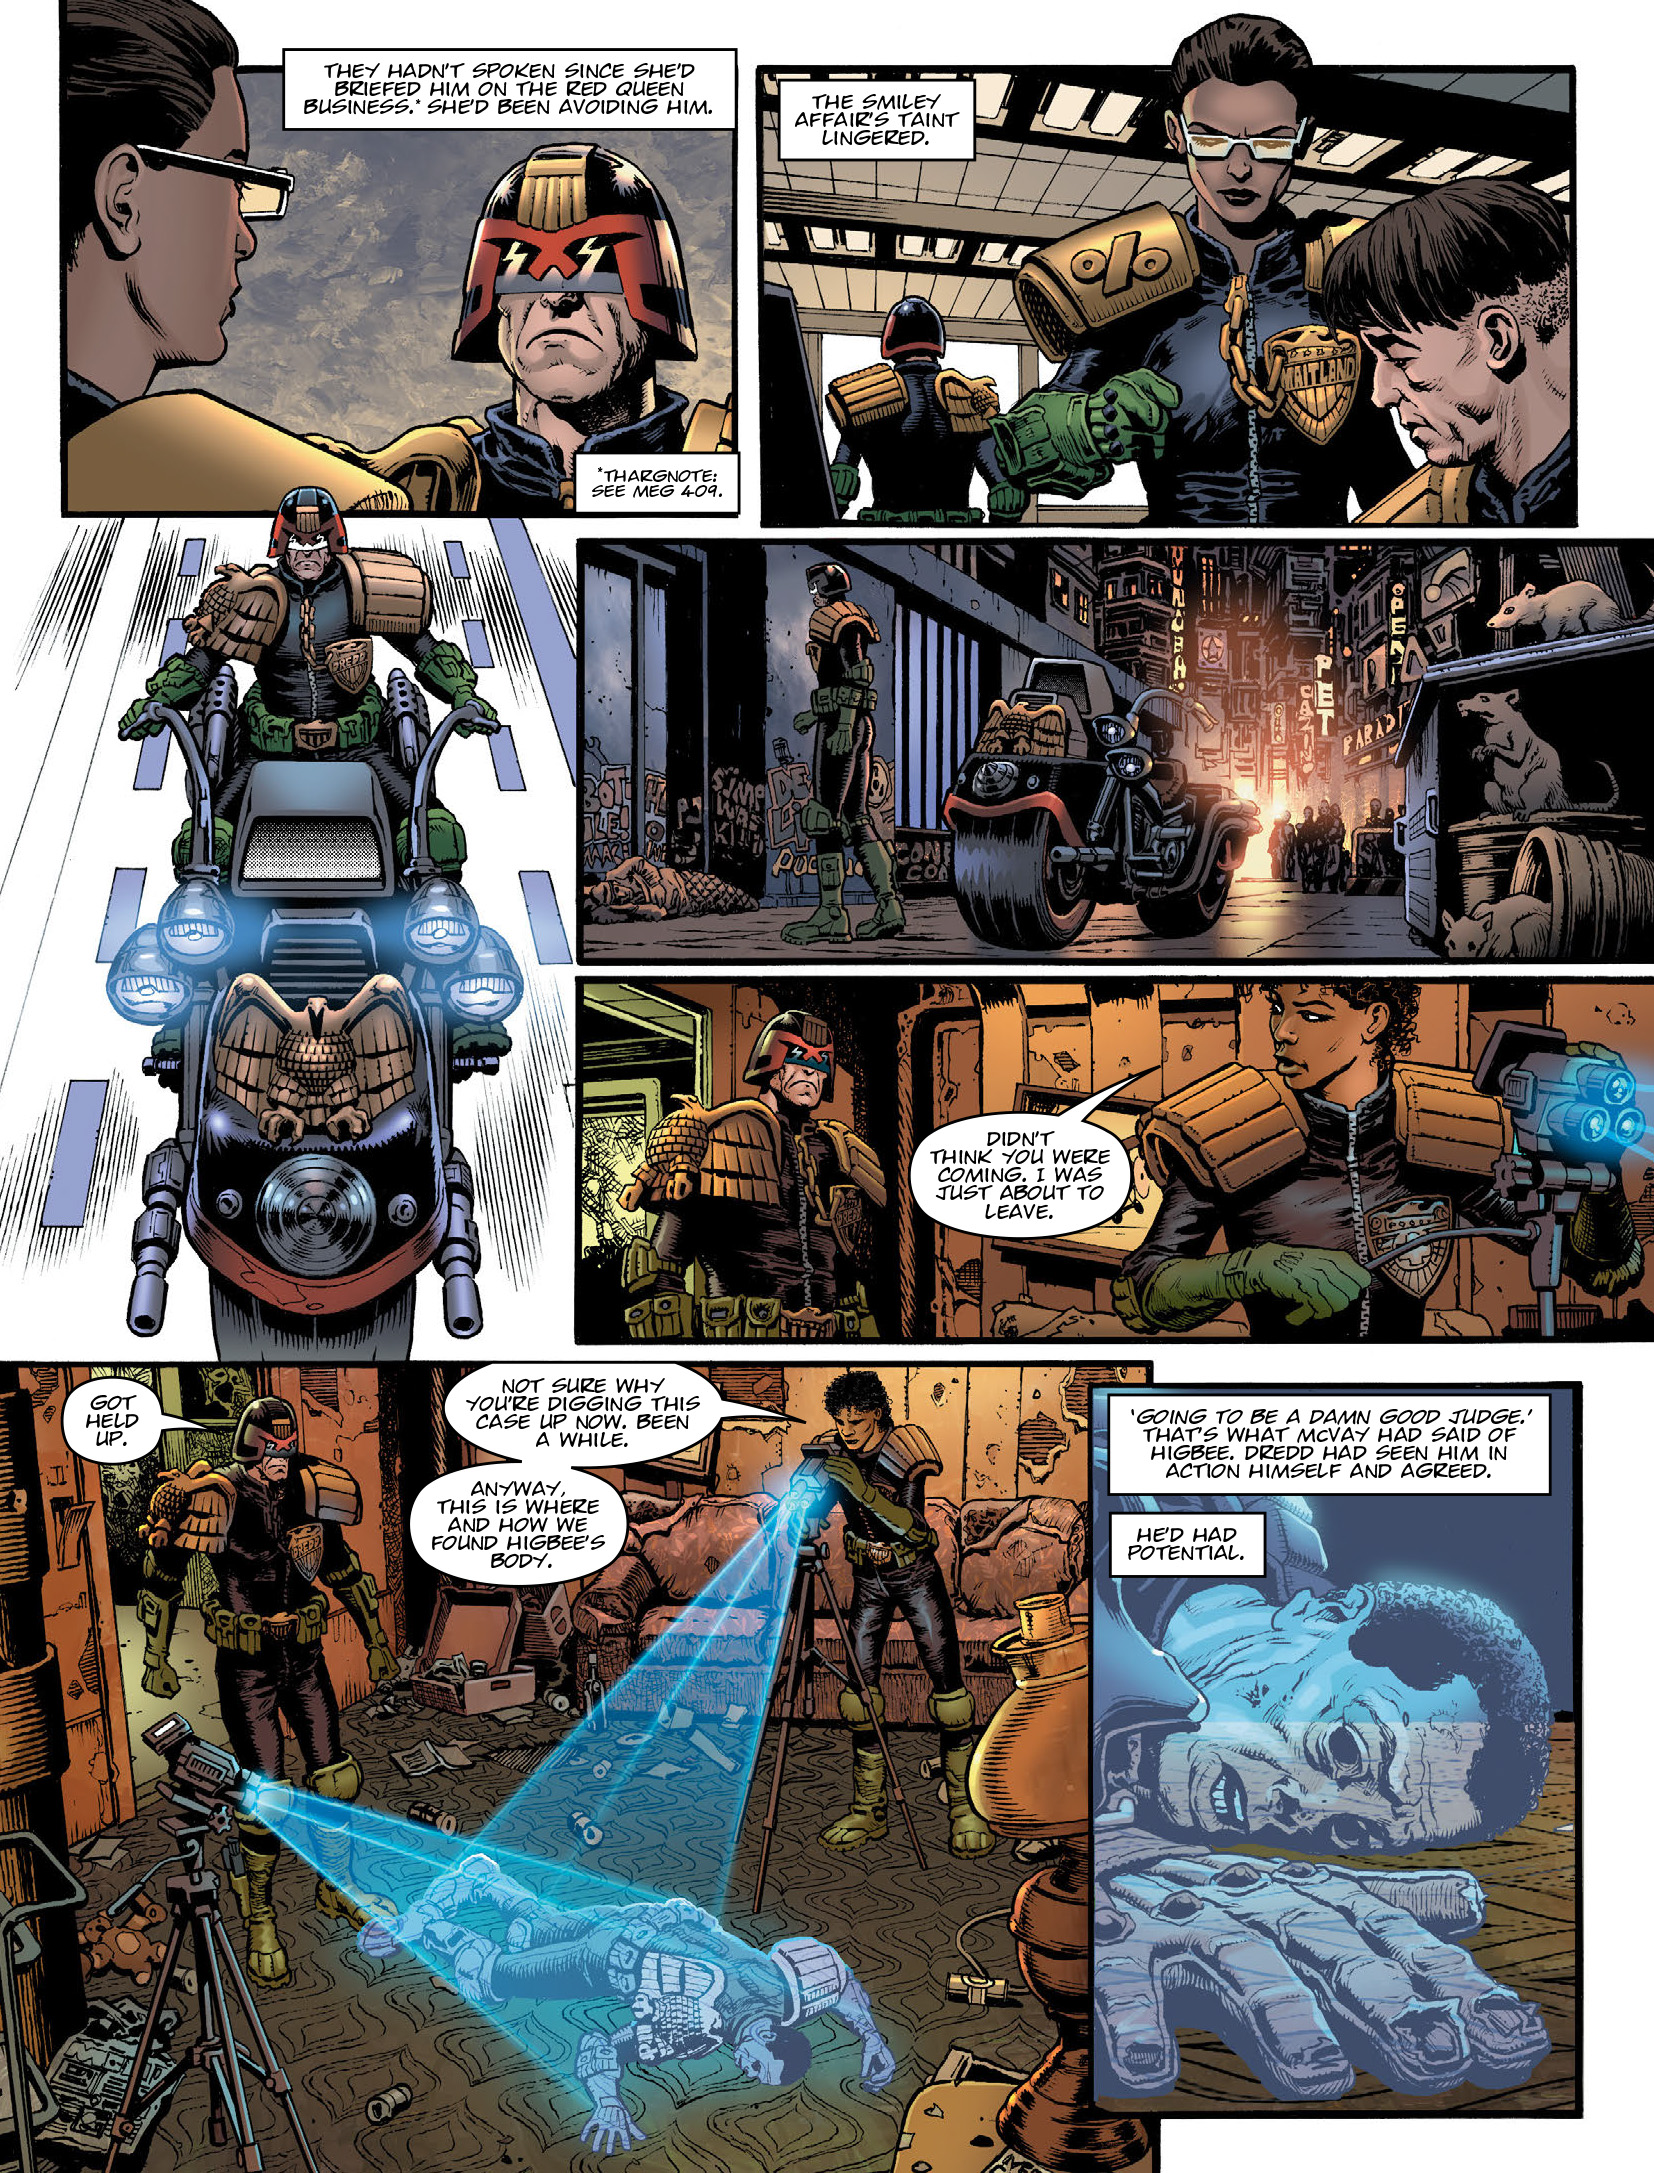 2000 AD: Chapter 2142 - Page 5